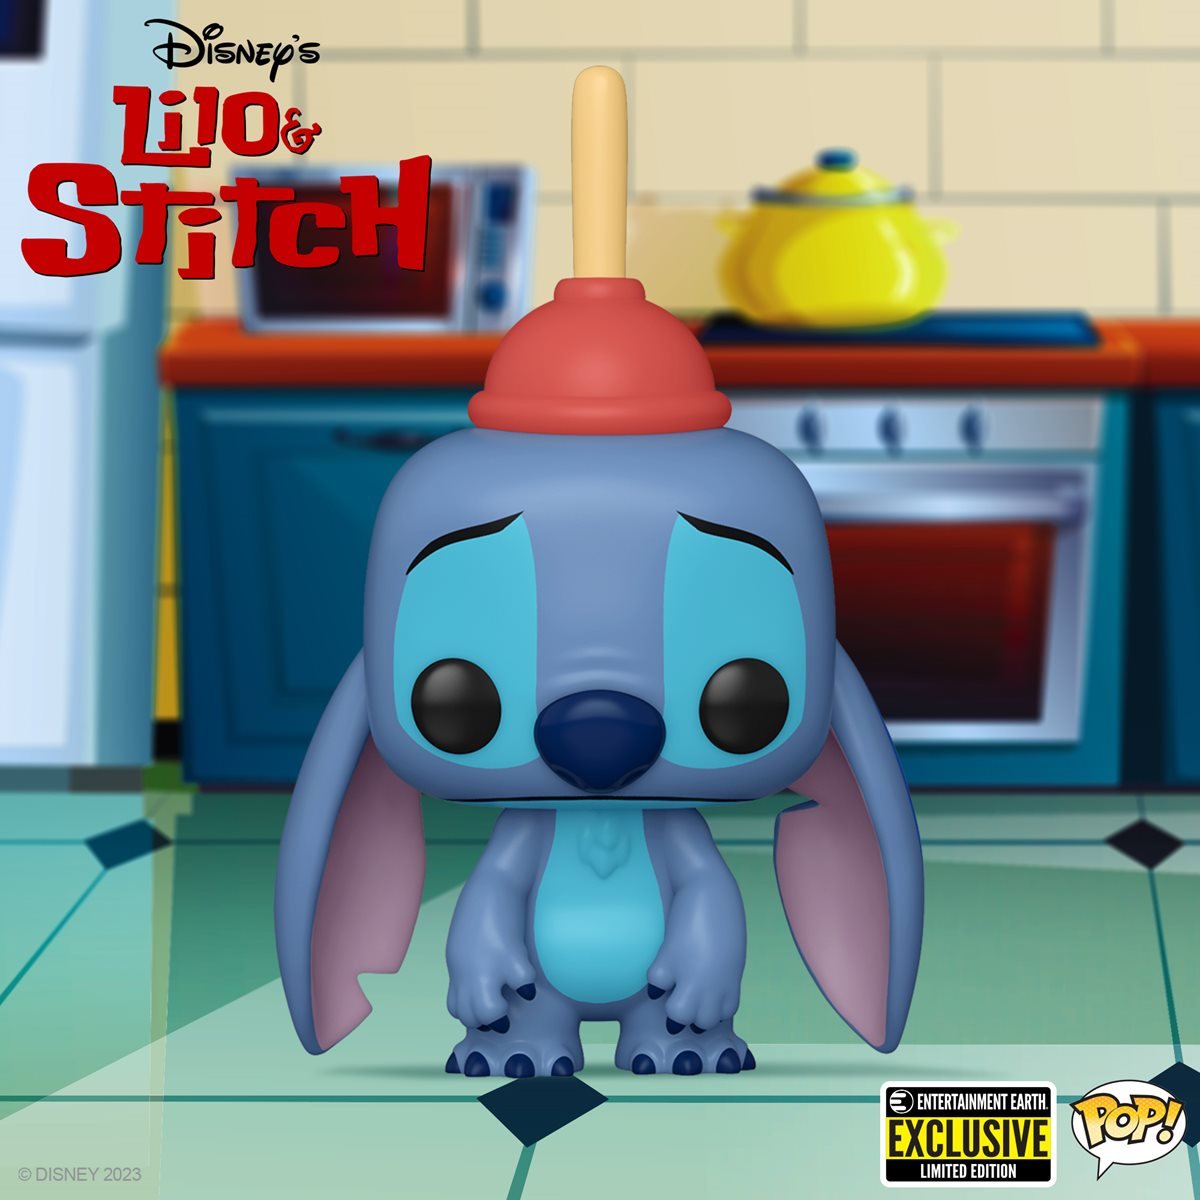 Order Now! A New Stitch Funko Pop Is In the Works!